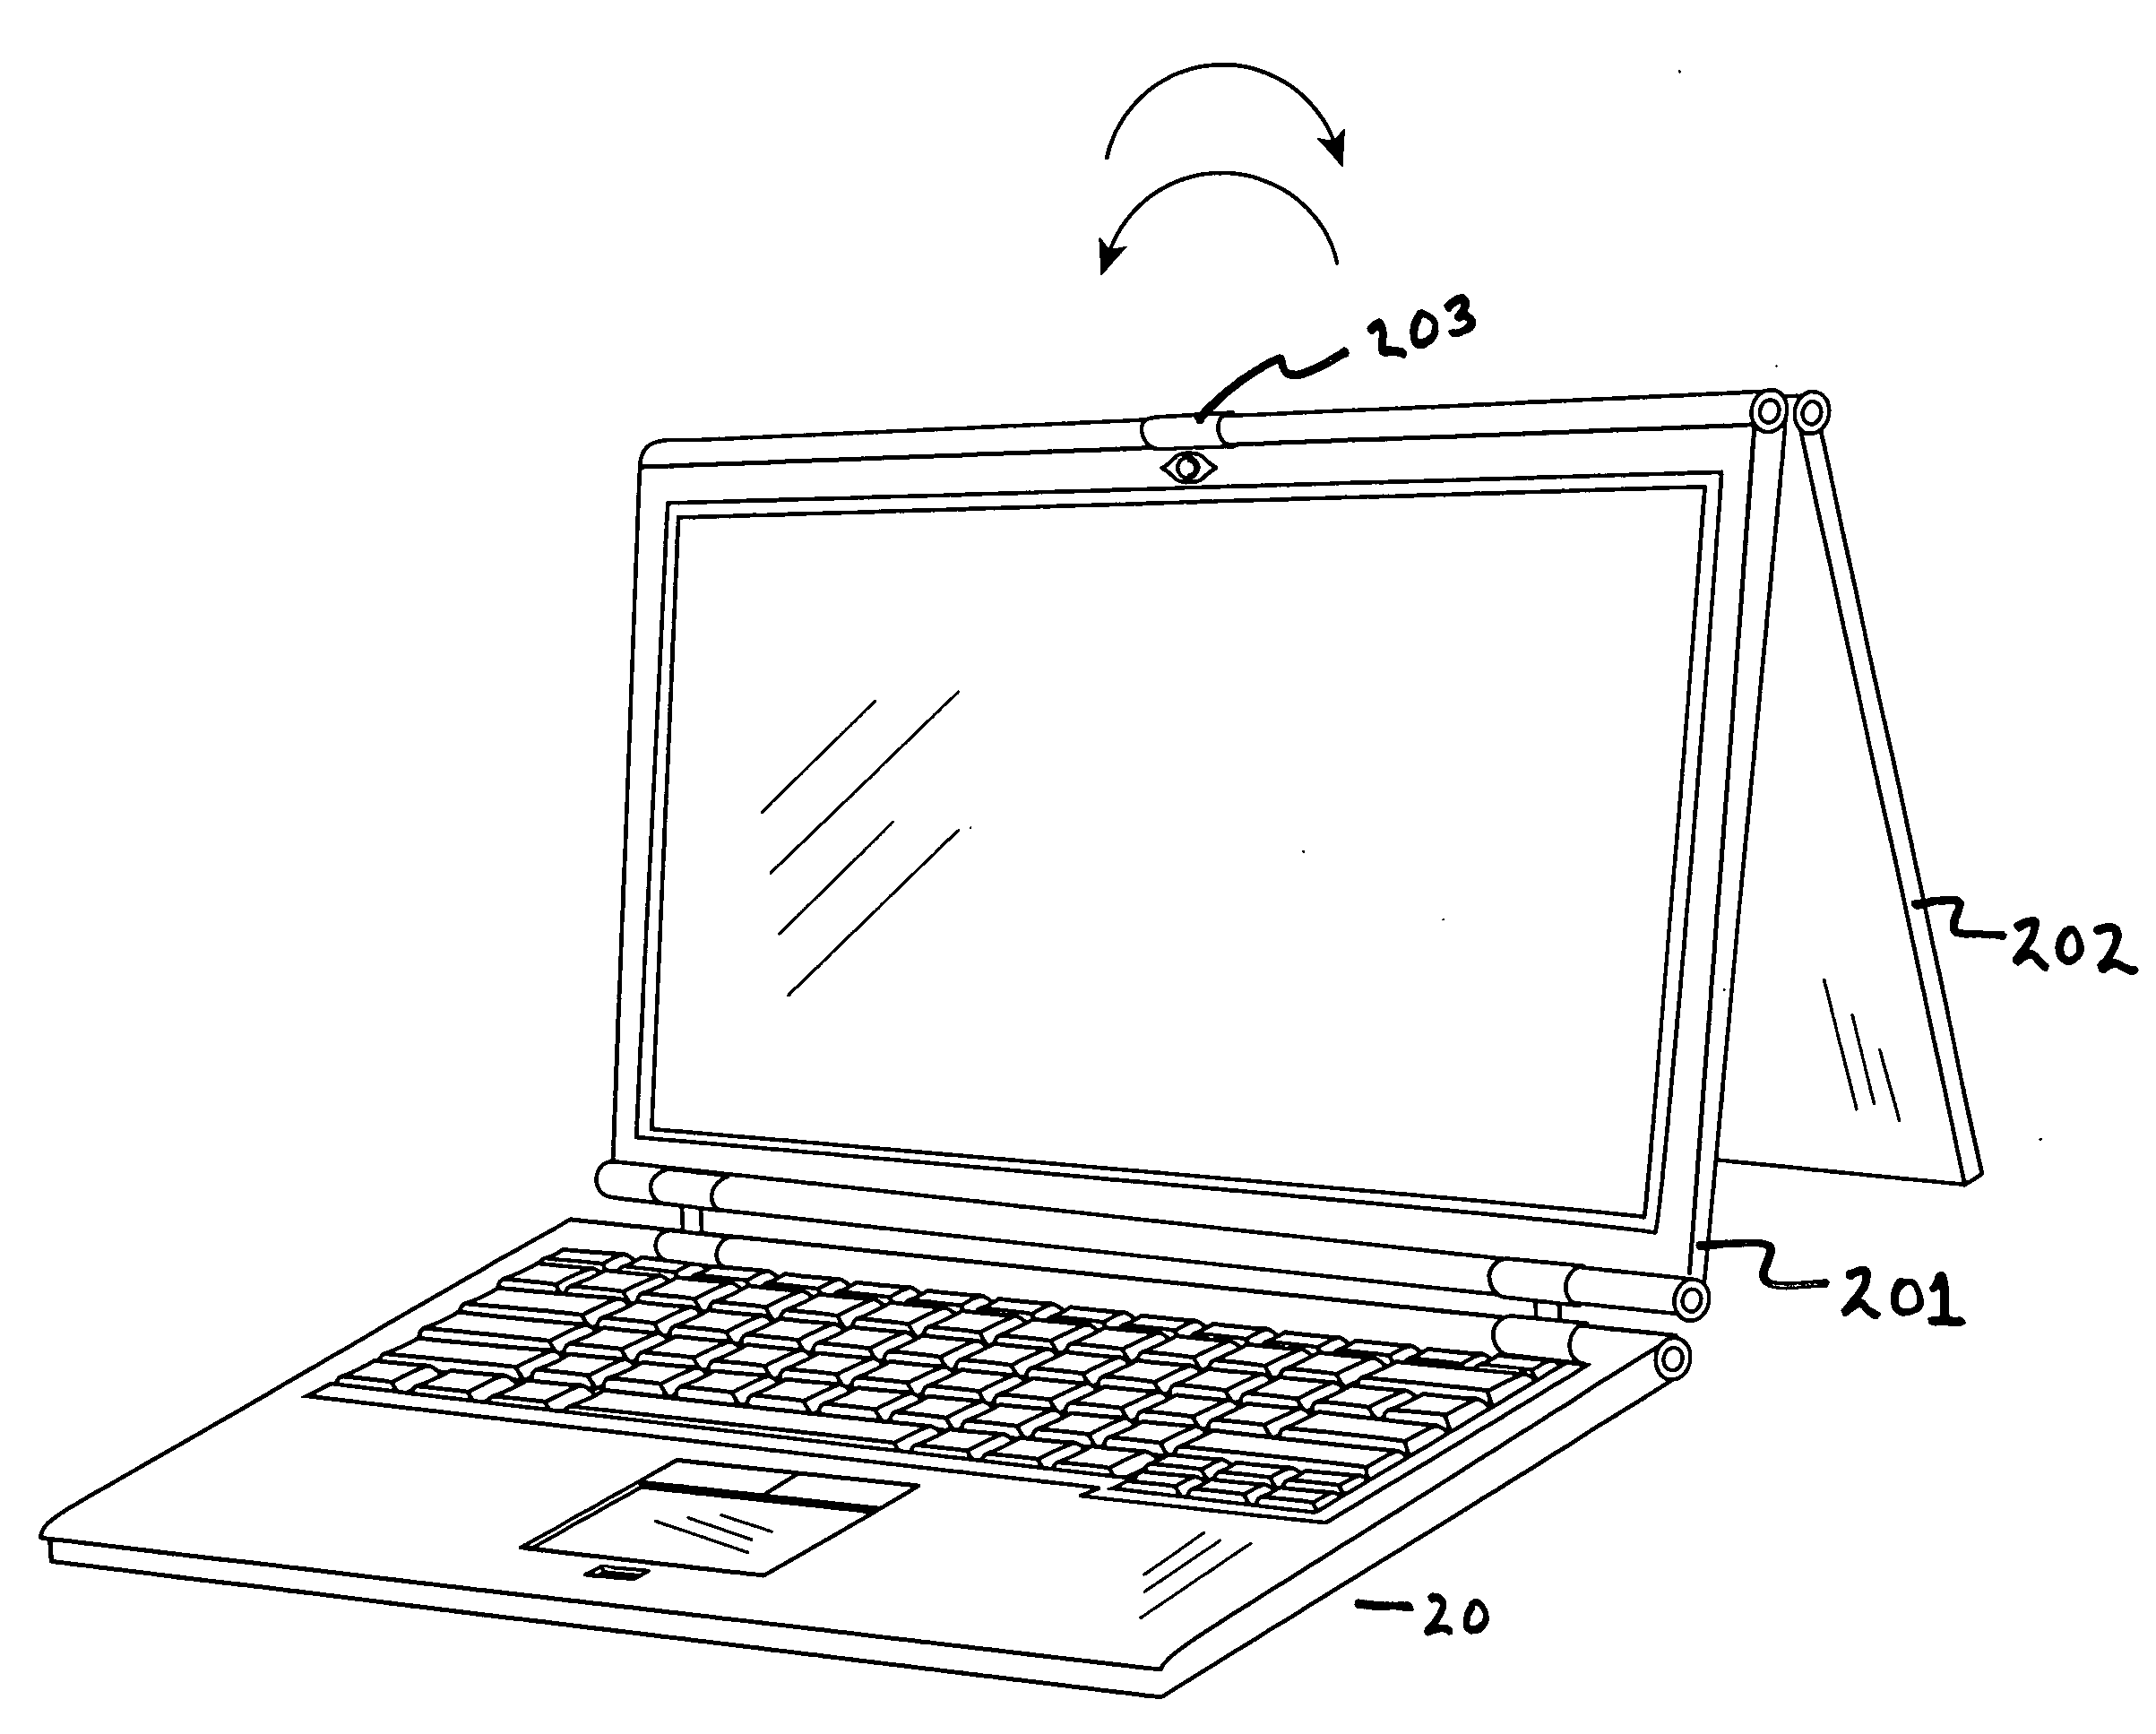 Two-sided display monitor apparatus